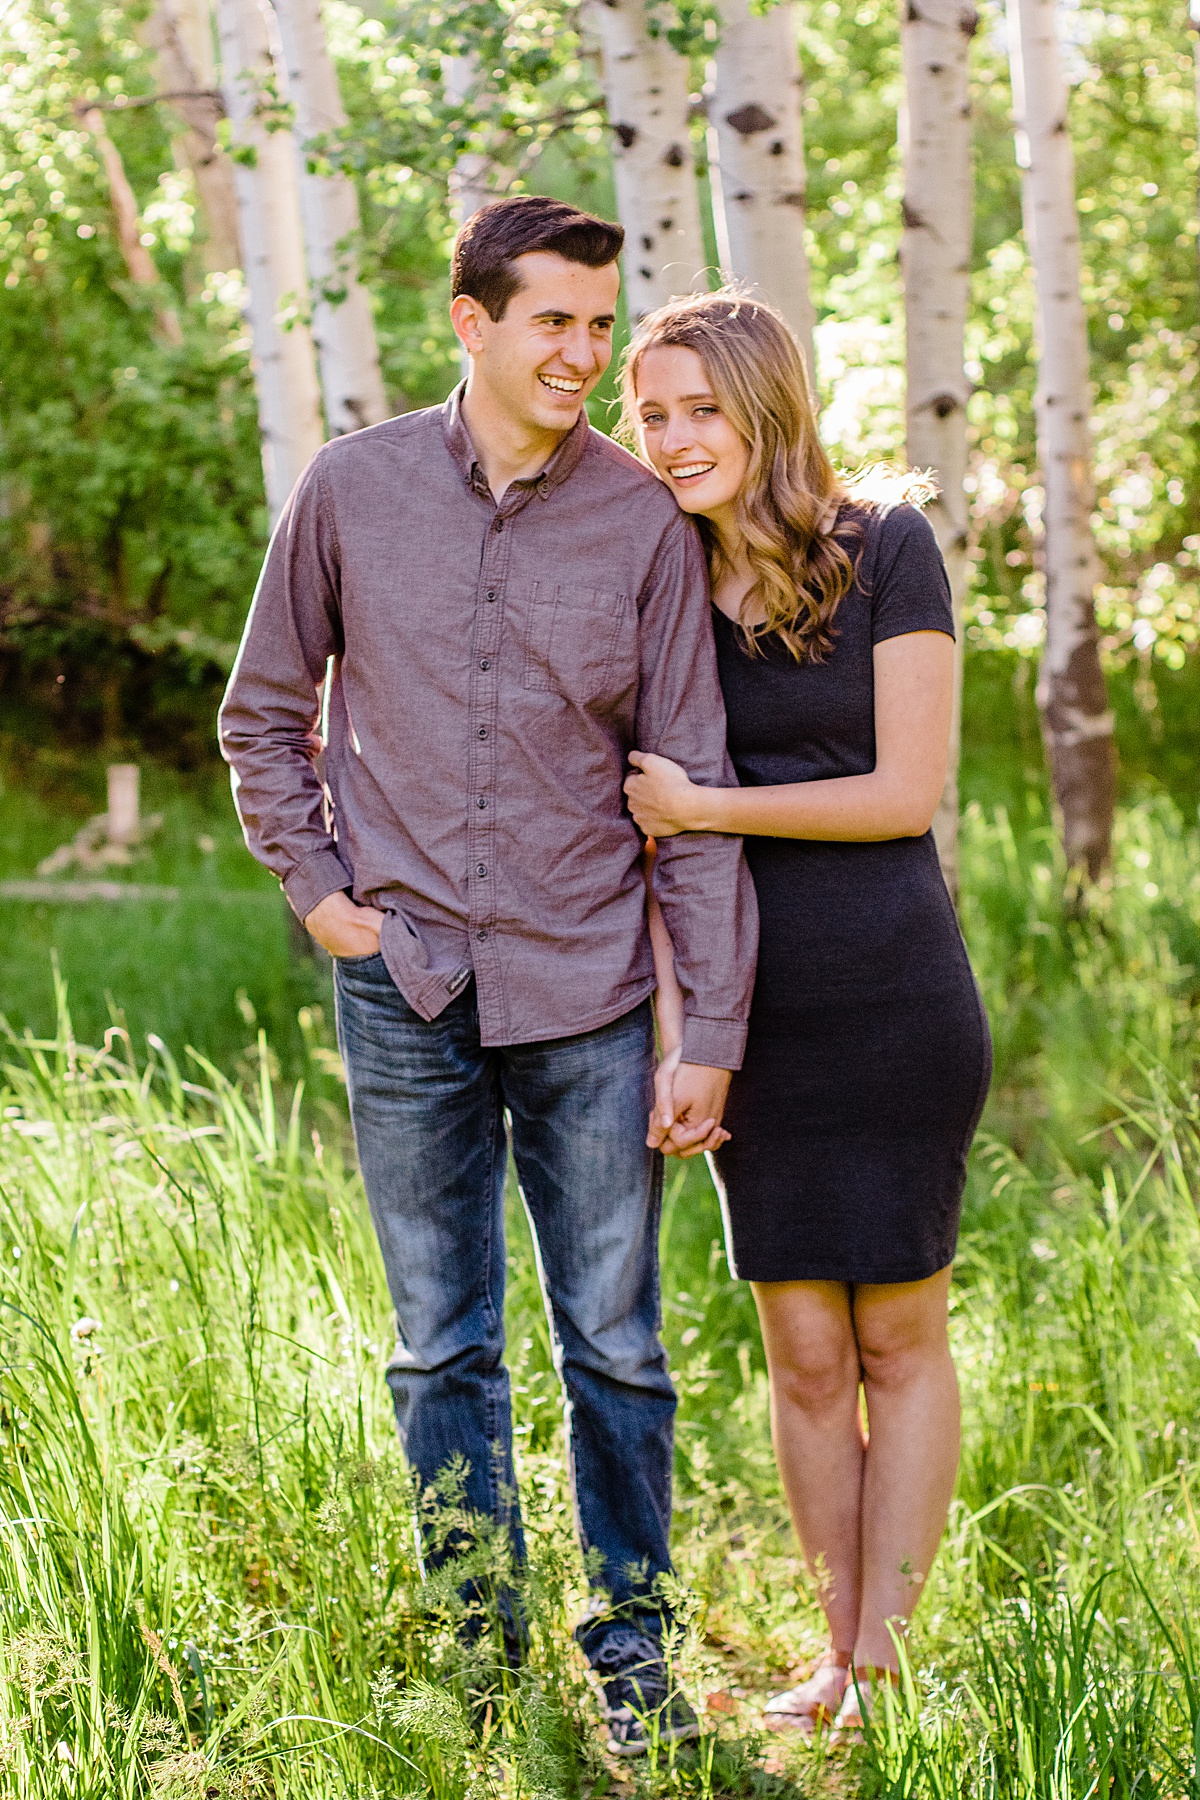 Provo Canyon Engagement Pictures | Phoenix Photographer